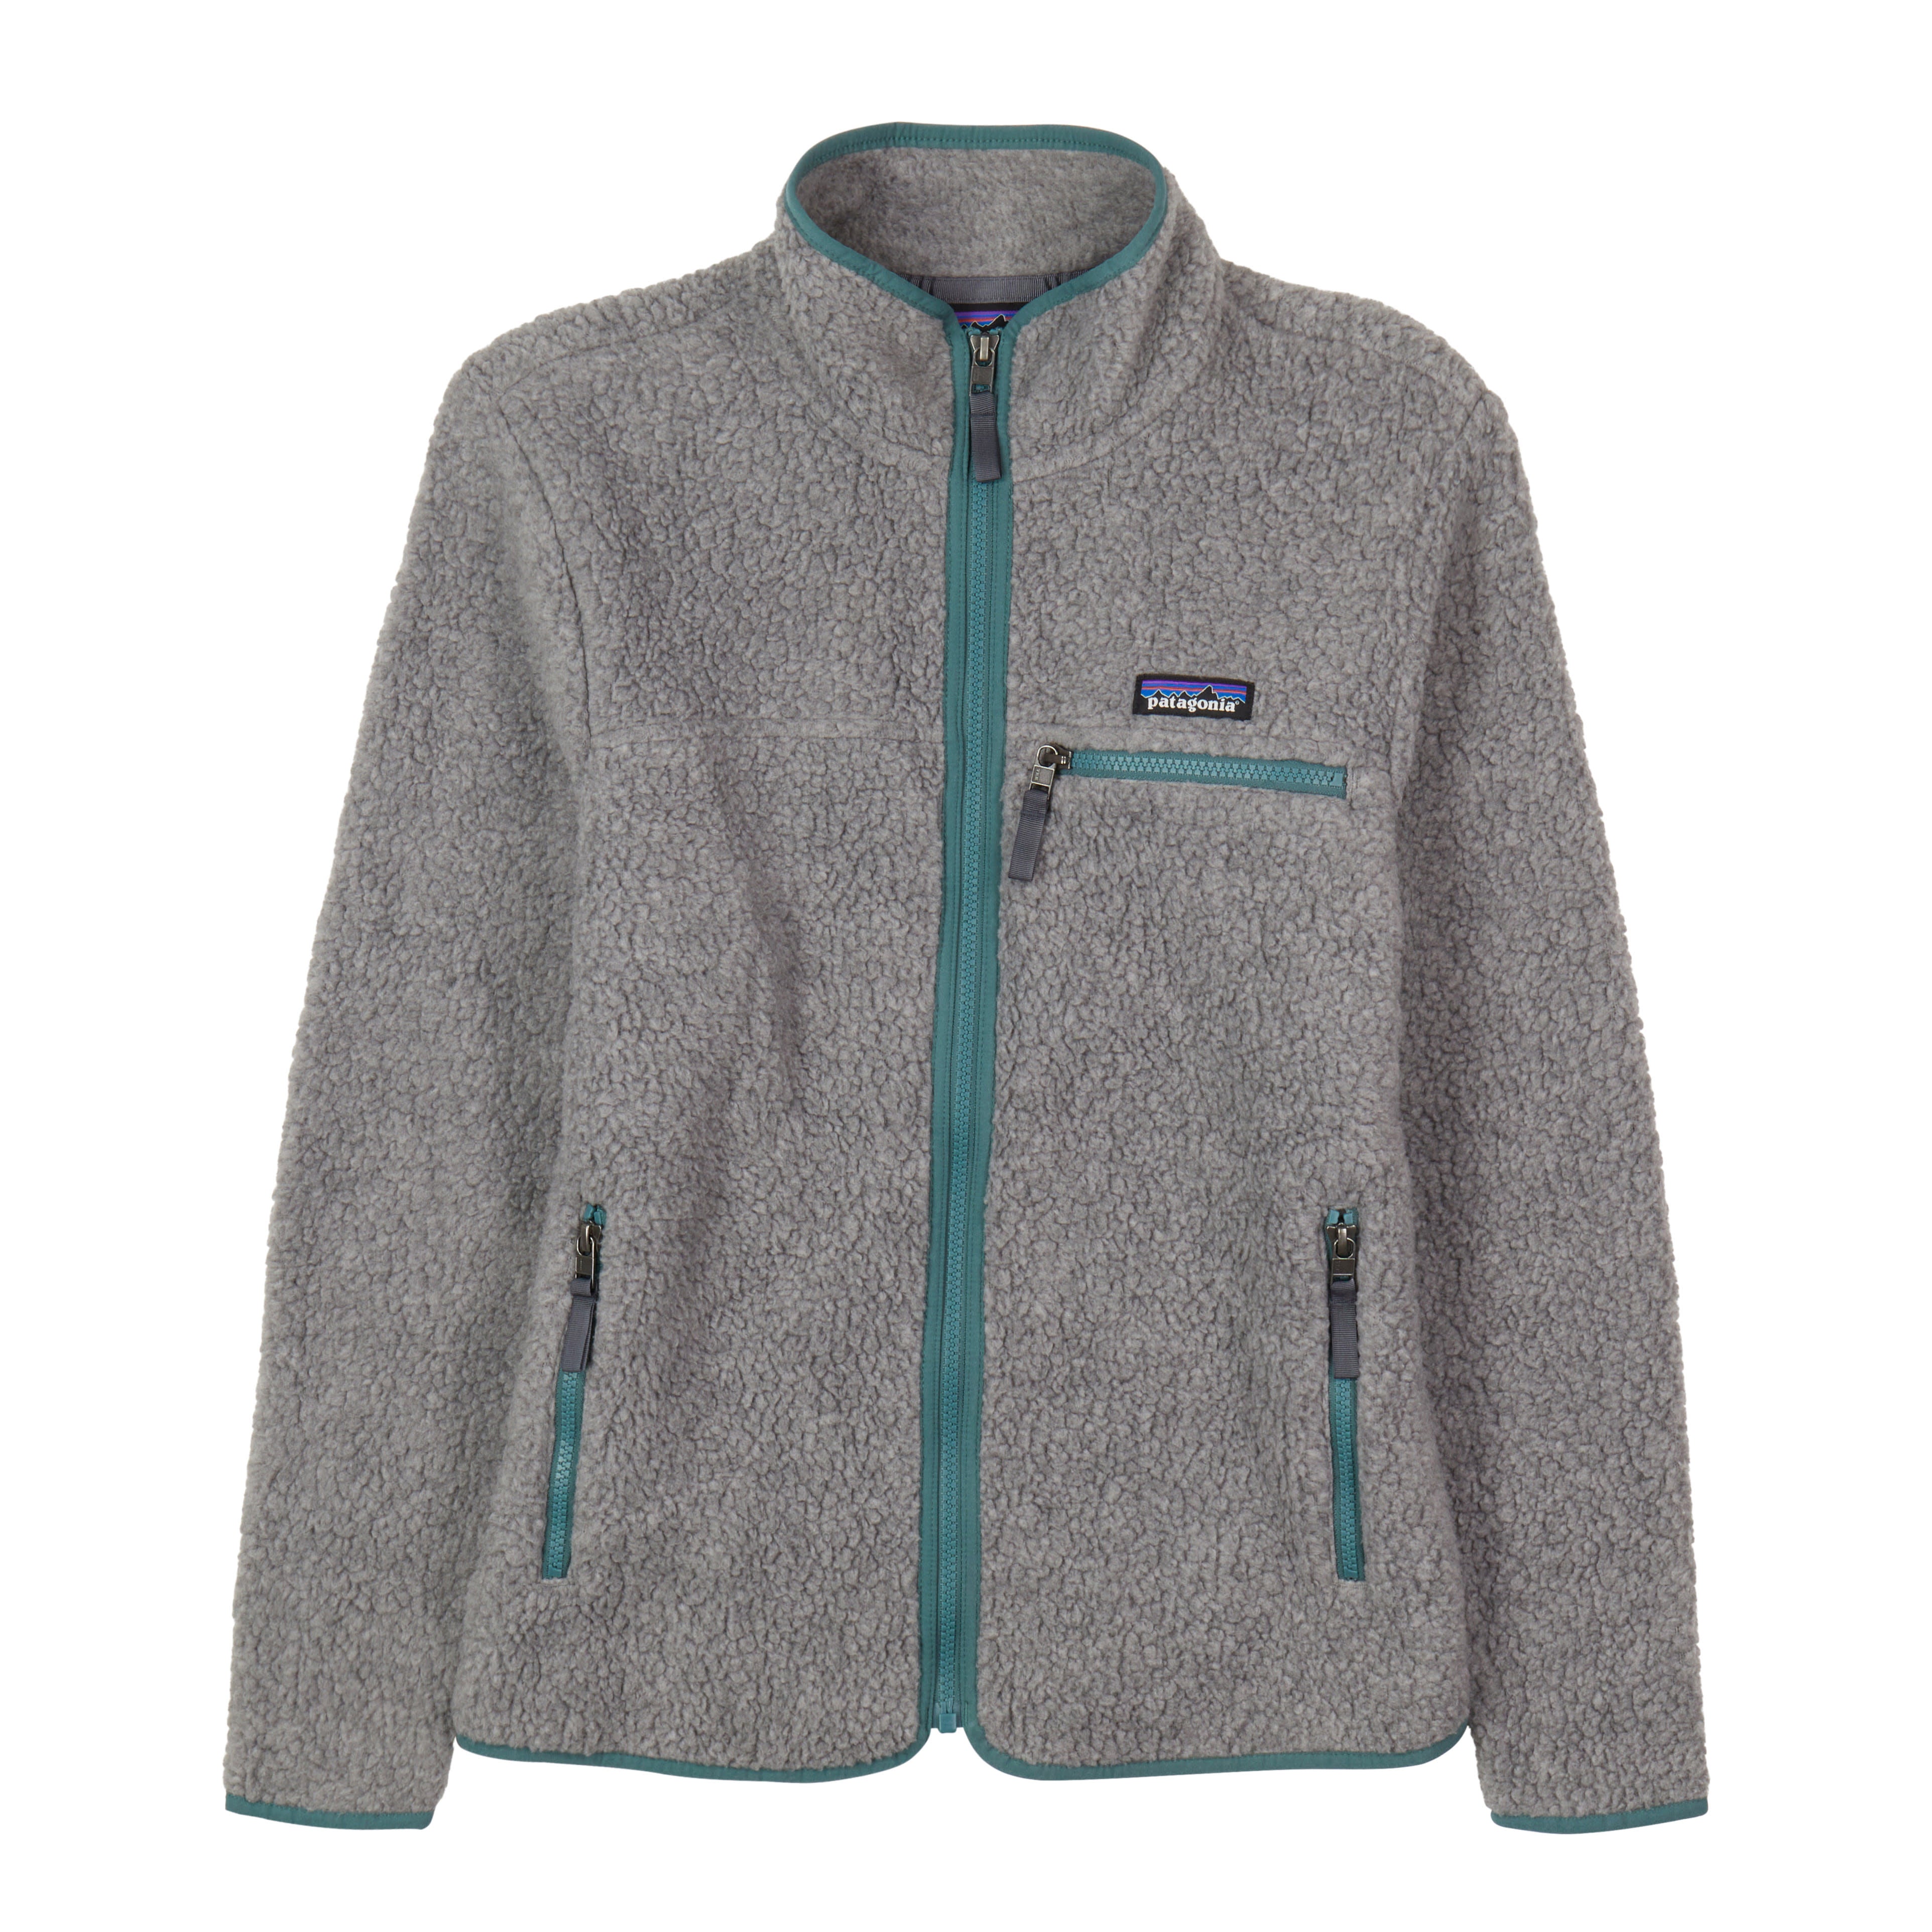 Giacca in pile invernale per donna PATAGONIA mod. 22795 RETRO PILE JACKET.  - Wegher